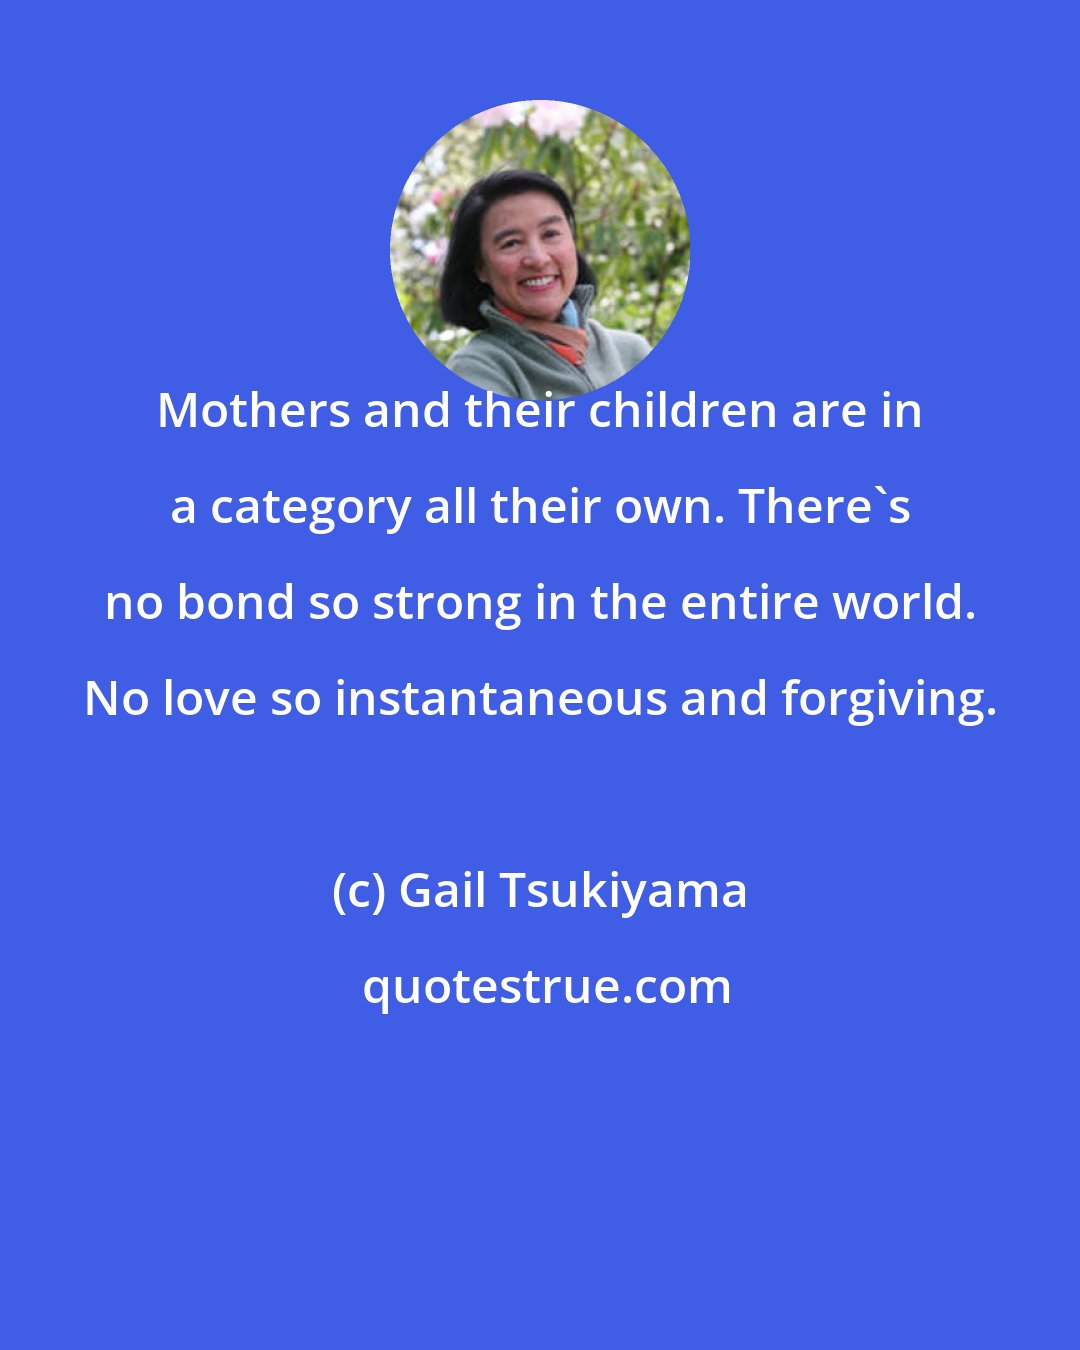 Gail Tsukiyama: Mothers and their children are in a category all their own. There's no bond so strong in the entire world. No love so instantaneous and forgiving.